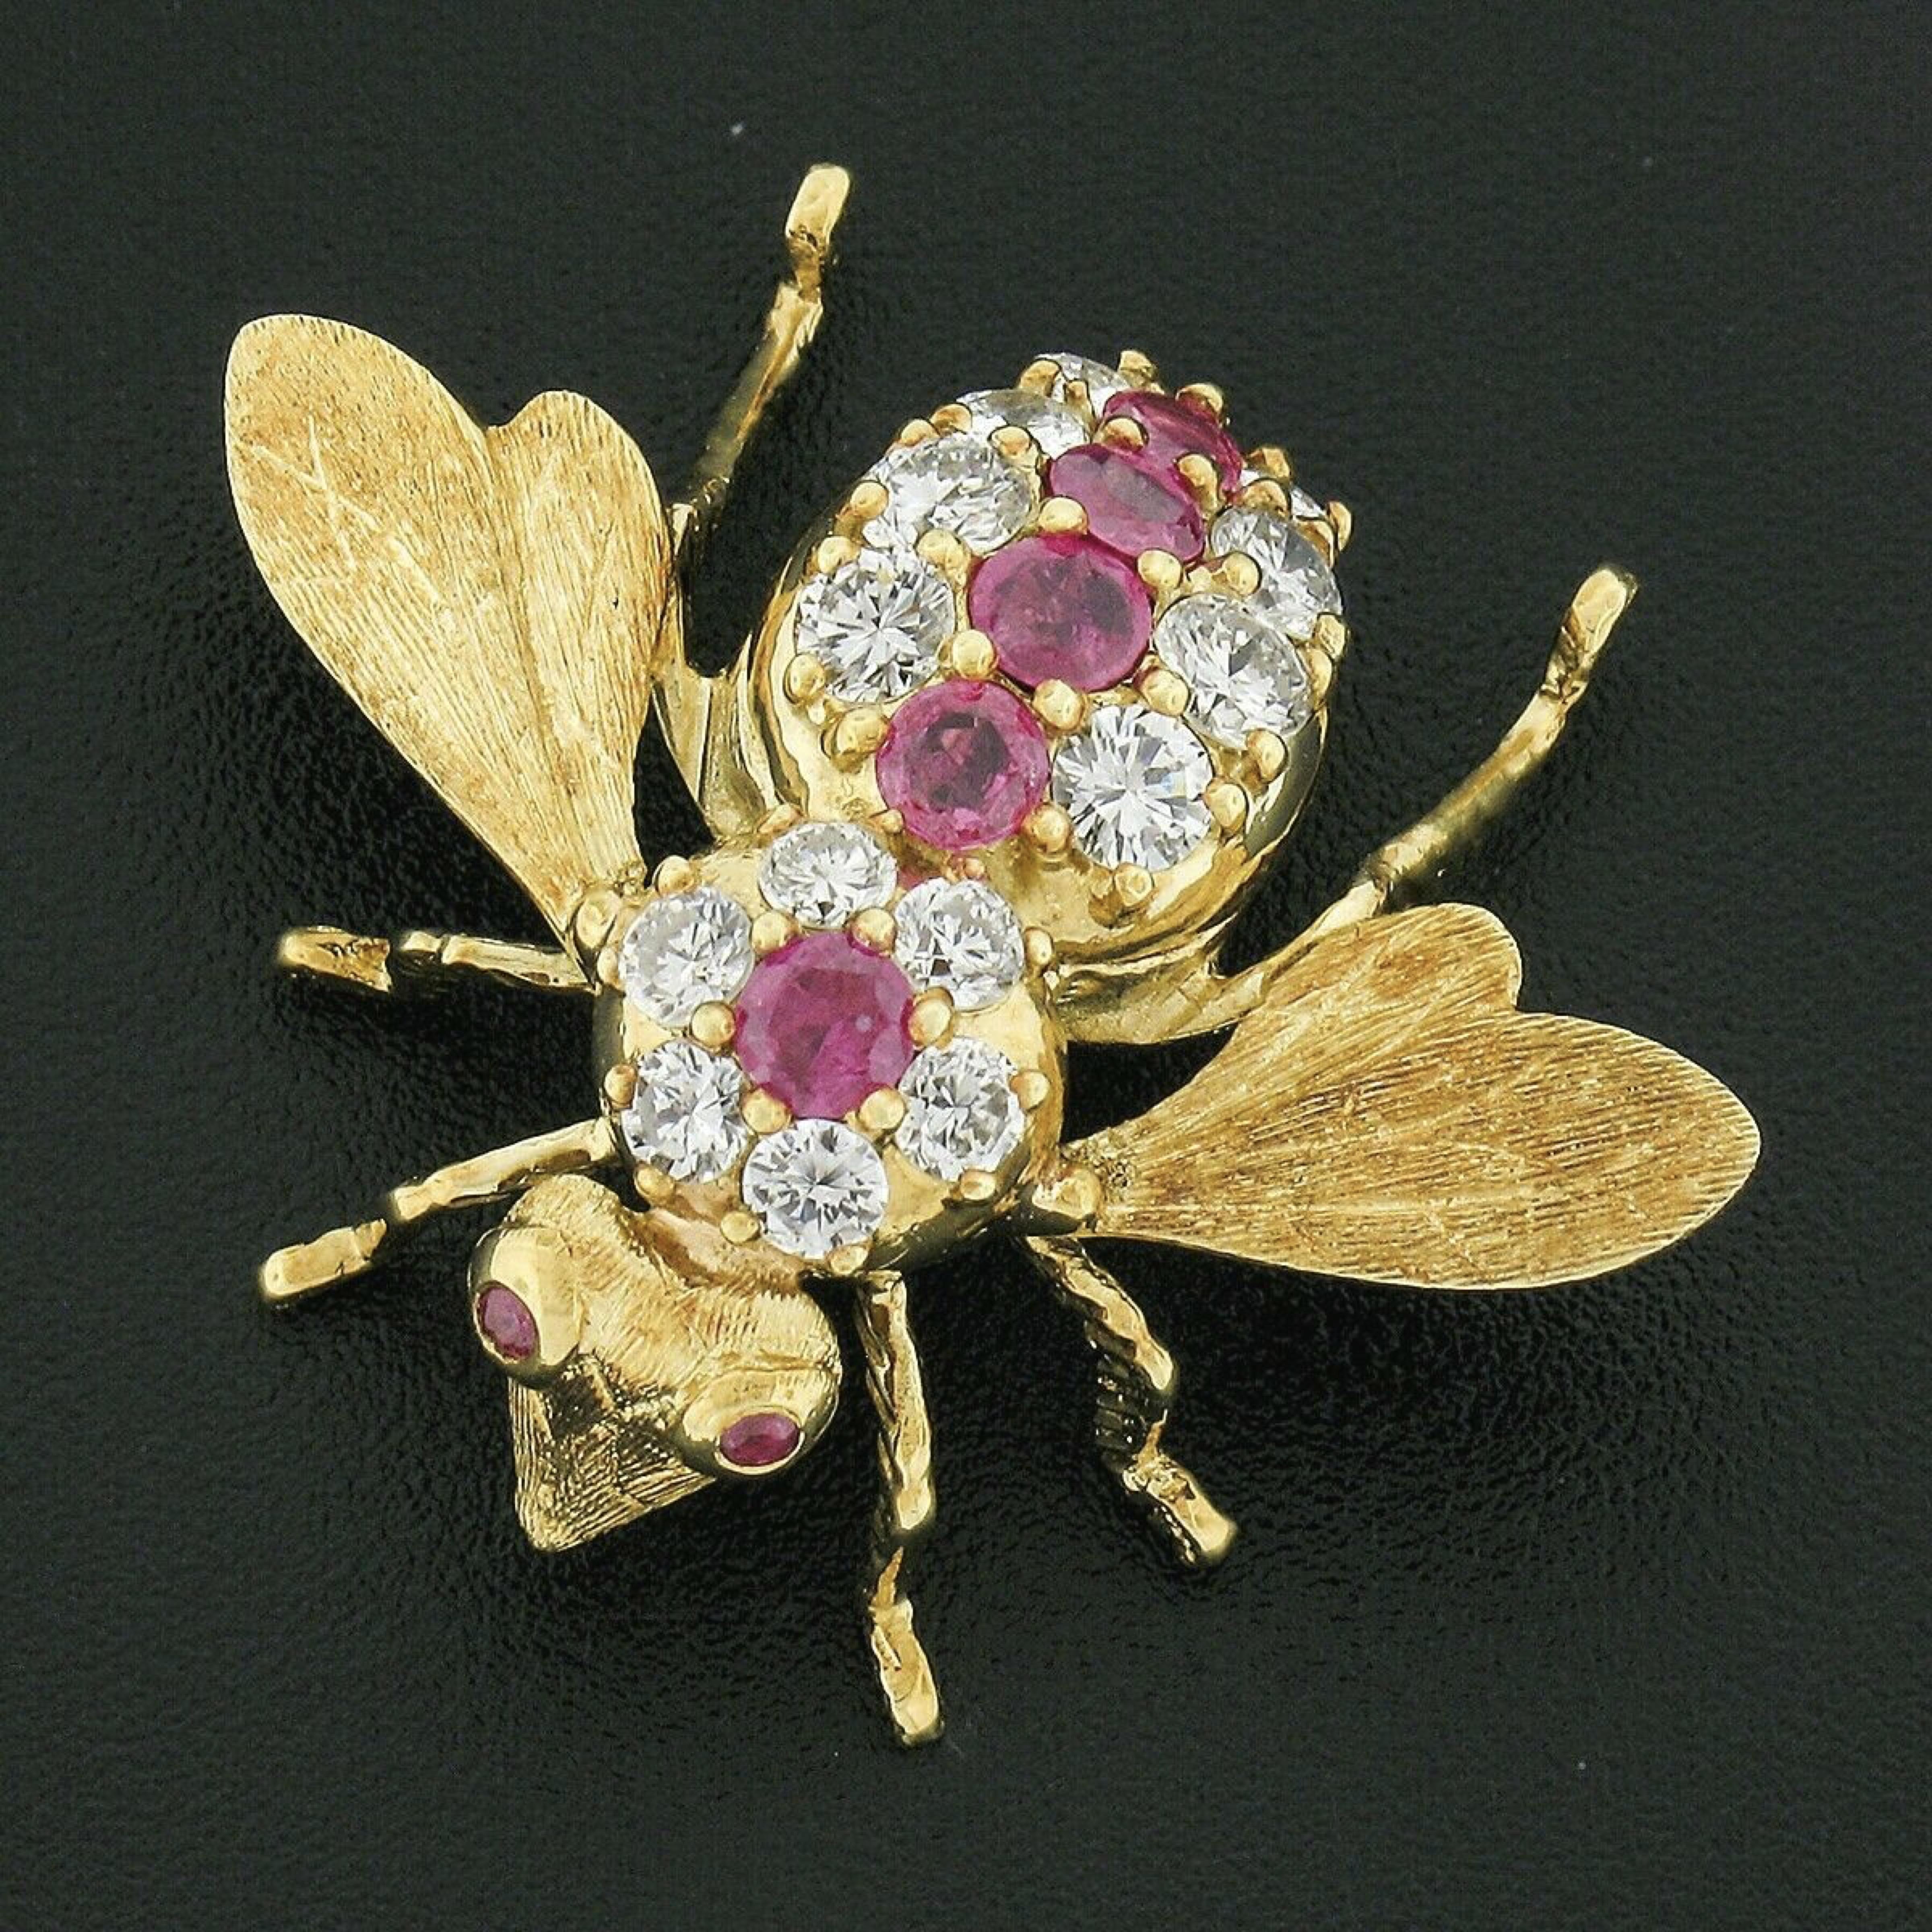 Here we have an incredibly detailed, vintage, pin/brooch that was designed by Herbert Rosenthal and crafted from solid 18k yellow gold. The brooch features a fly/bee insect design and drenched with fine quality rubies and diamonds throughout its